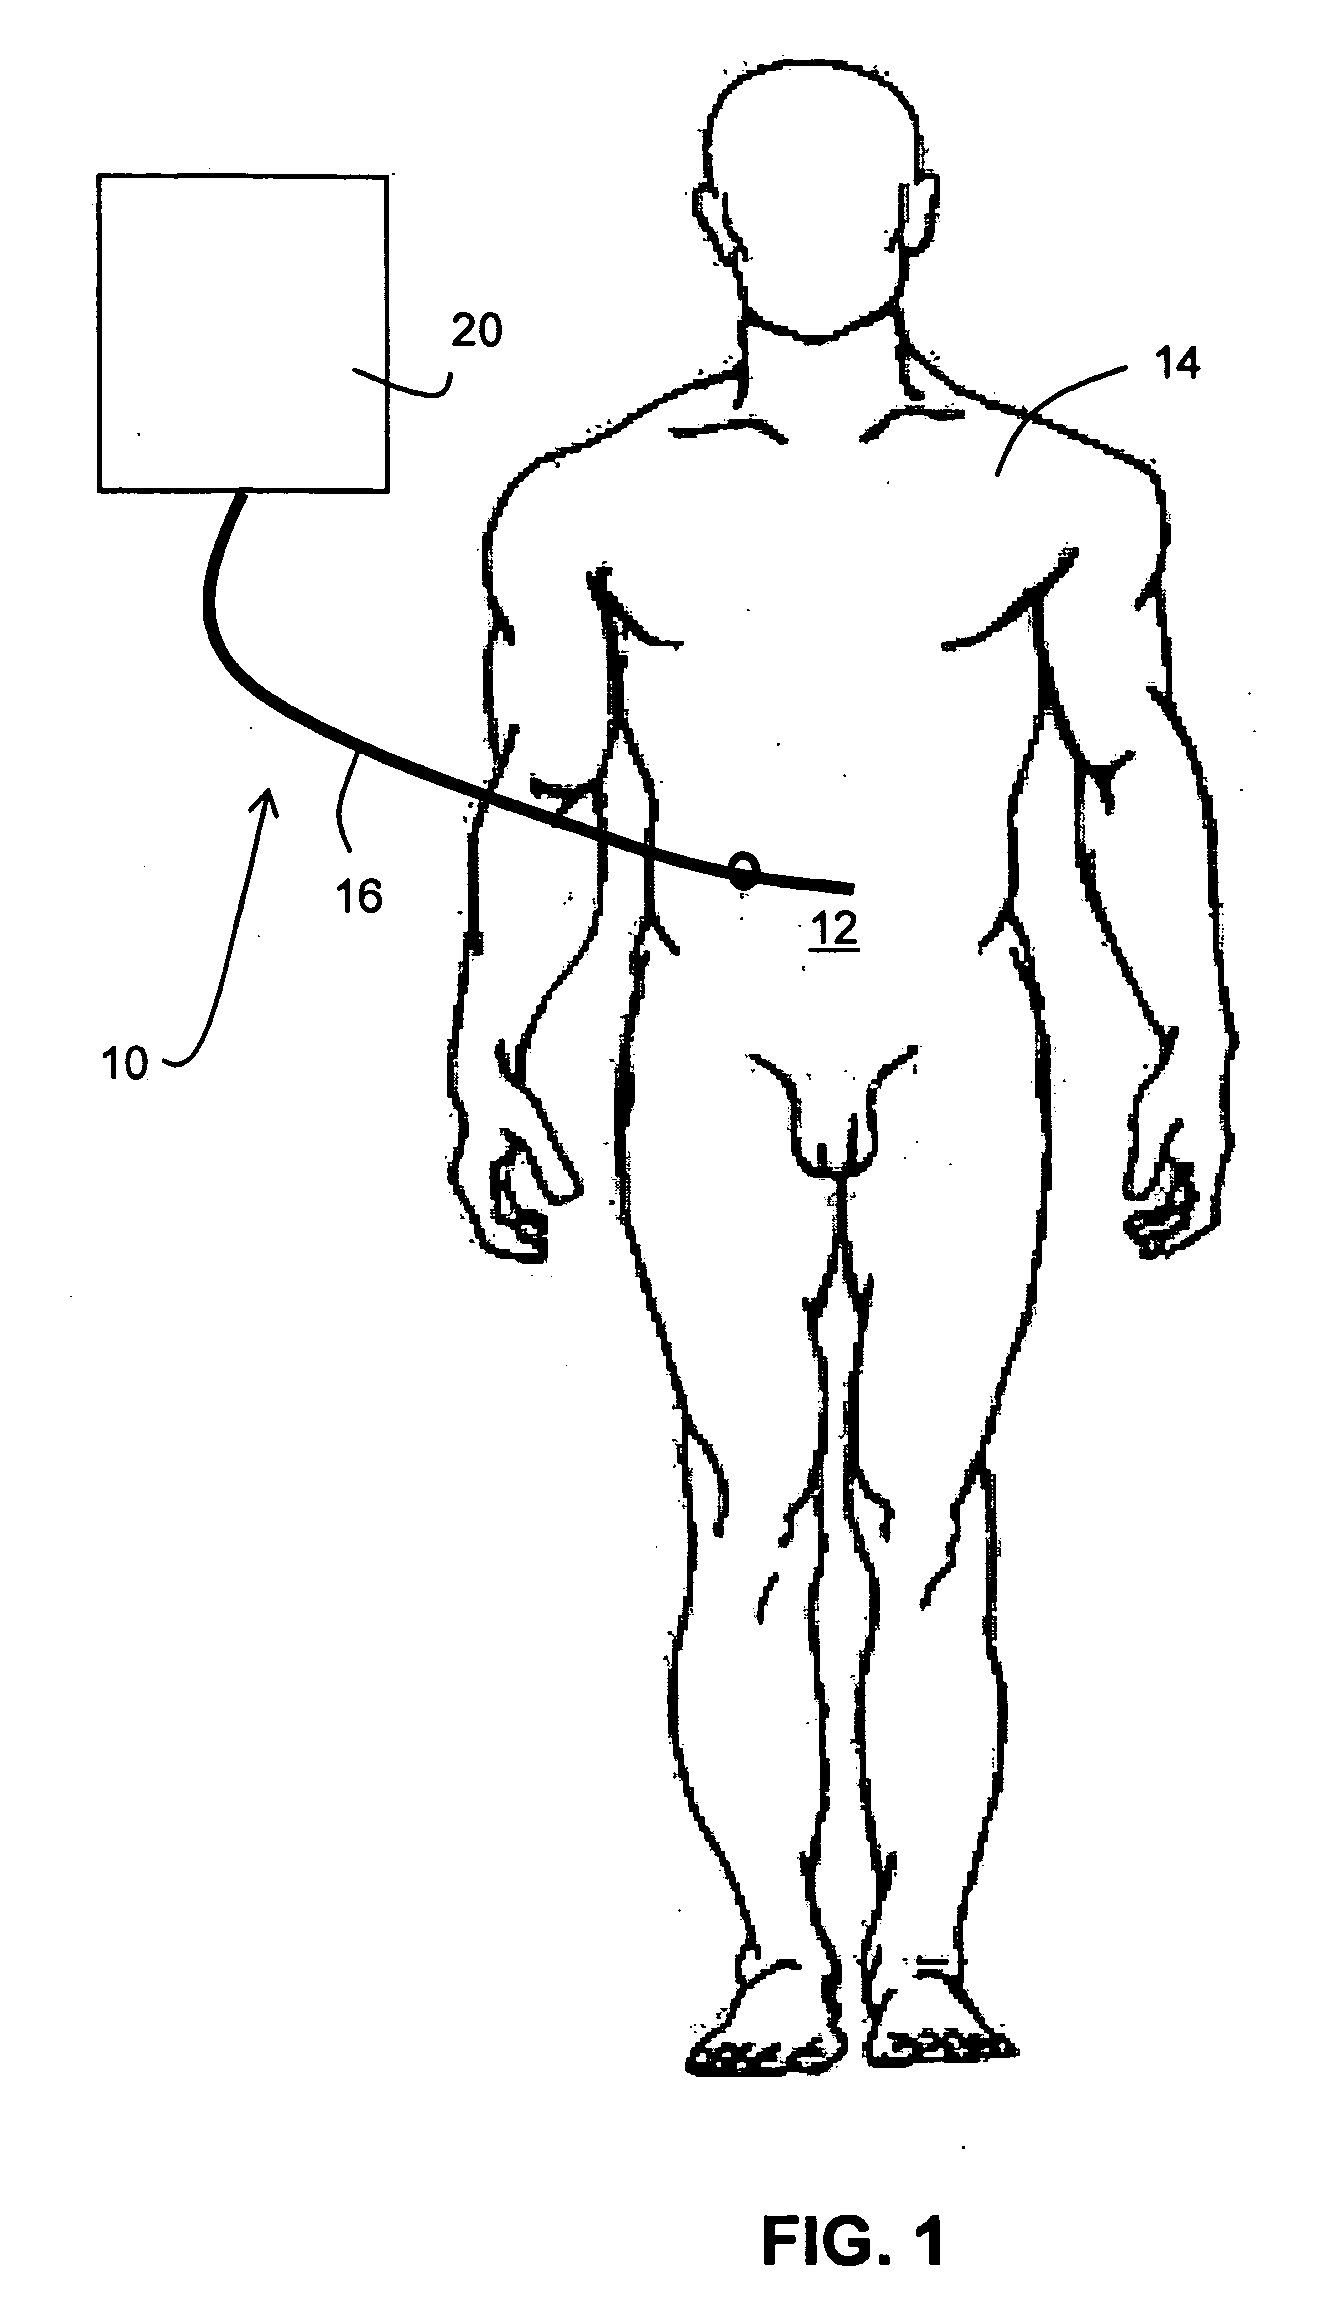 Hypothermia Devices and Methods